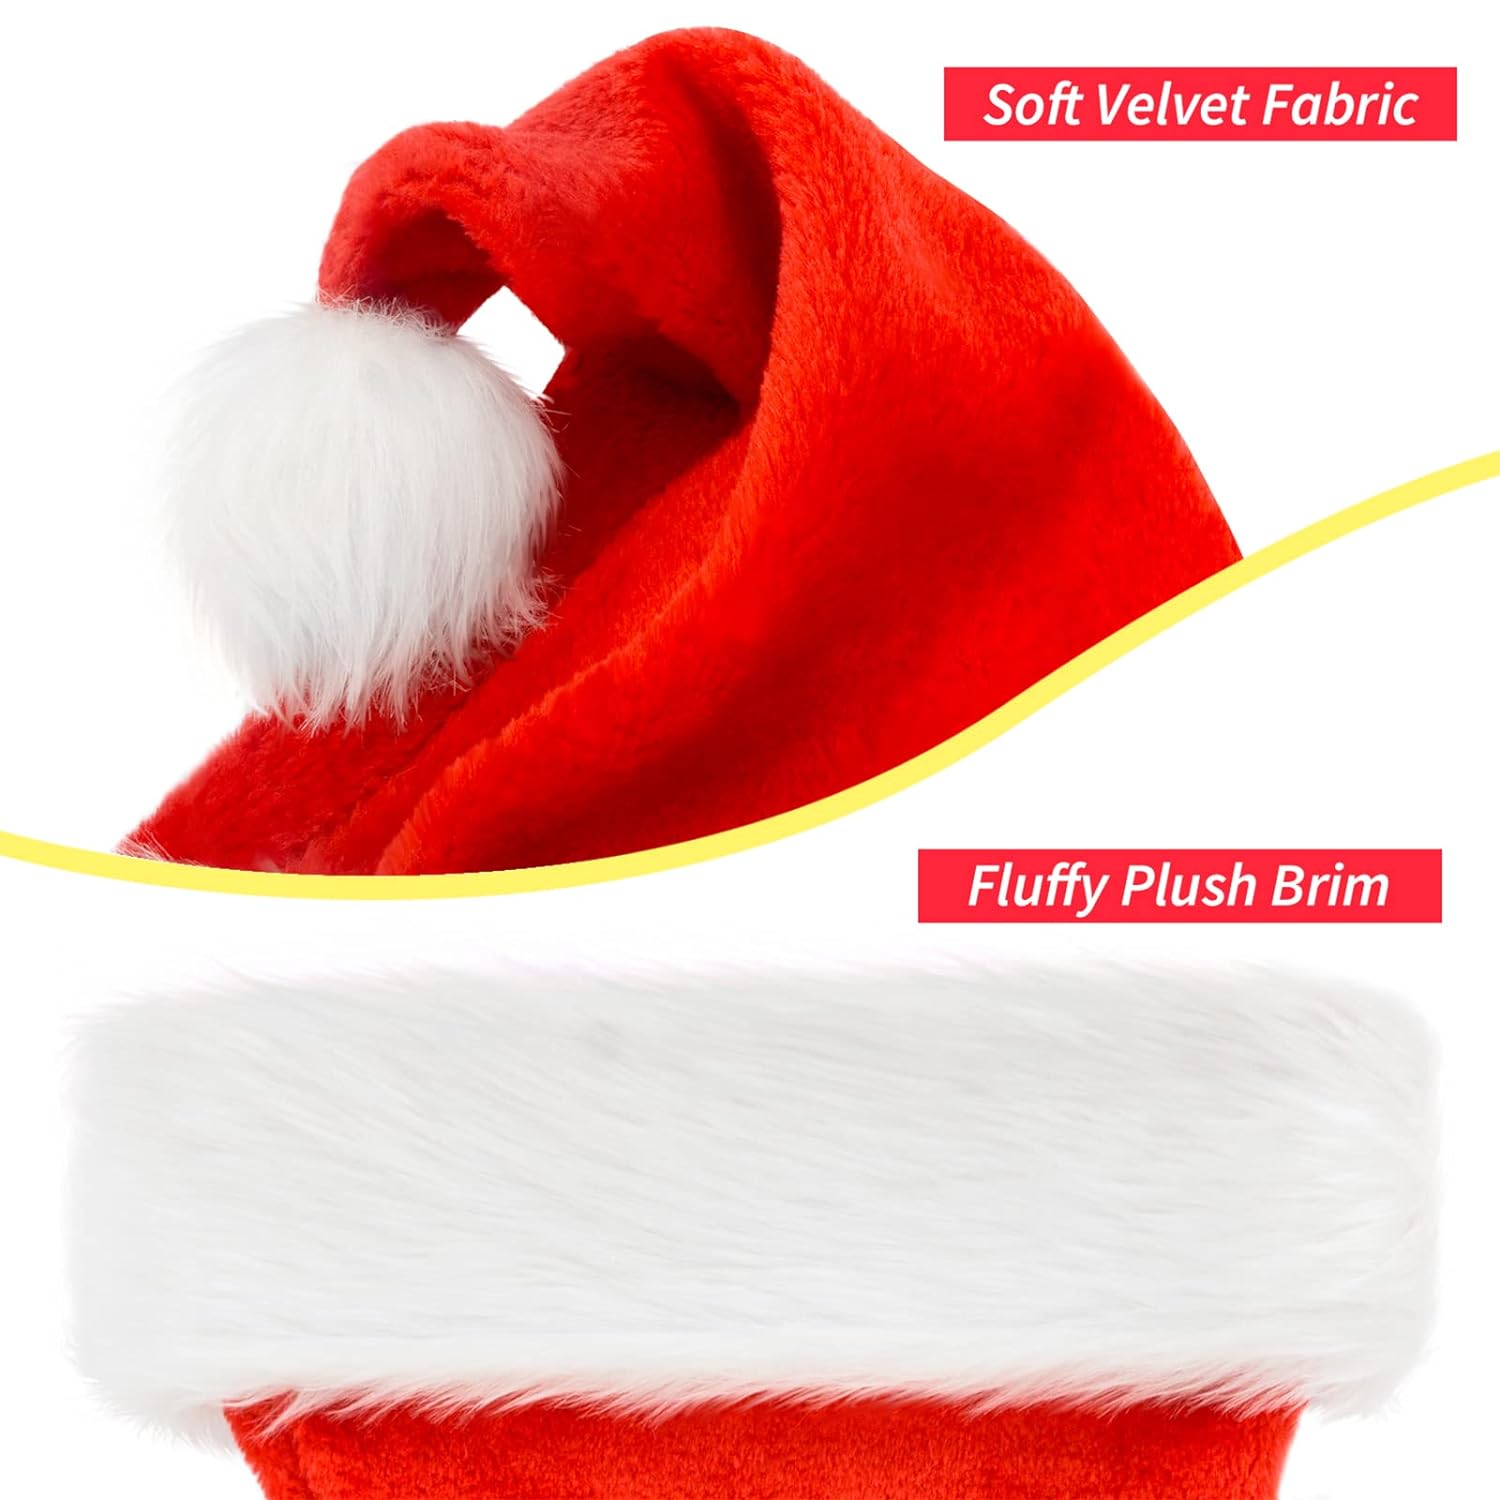 eCraftIndia Red and White Velvet Classic Fur Merry Christmas Hats, Santa Claus Caps for kids and Adults - XMAS Caps, Santa Hats for Christmas, New Year, Festive Holiday Party Celebration (Set of 6) 6